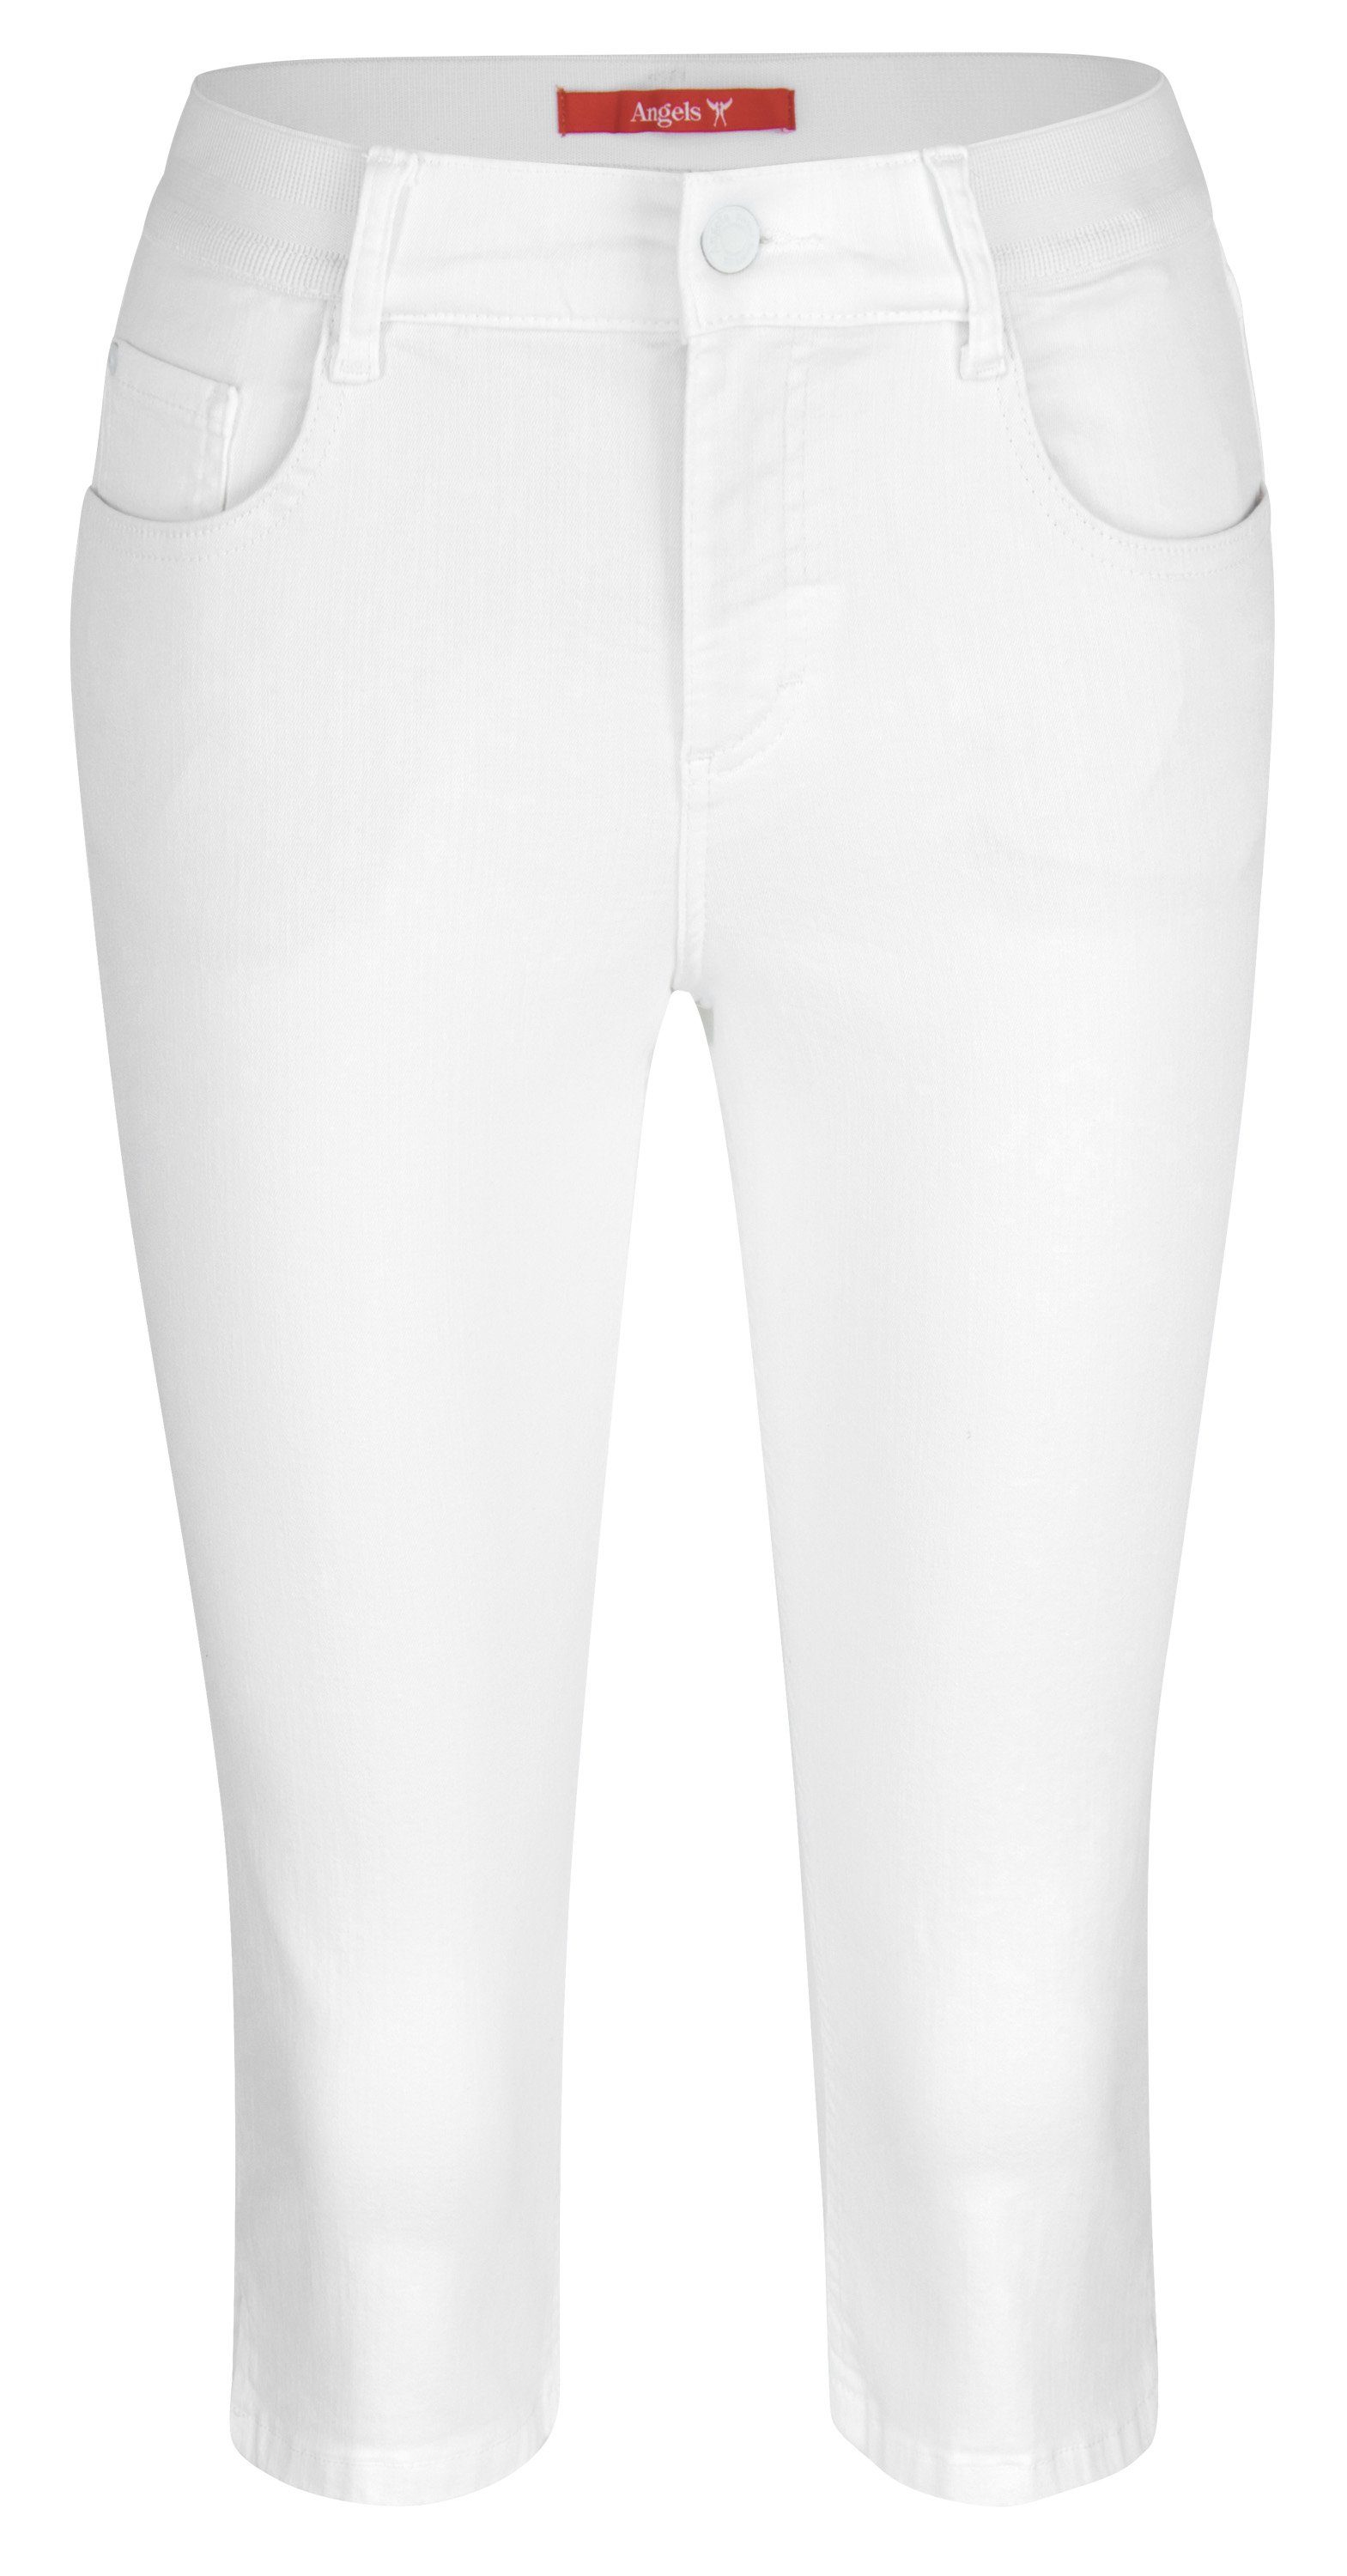 ANGELS Stretch-Jeans ANGELS JEANS ONE SIZE 3/4 CAPRI white 399 433700.70